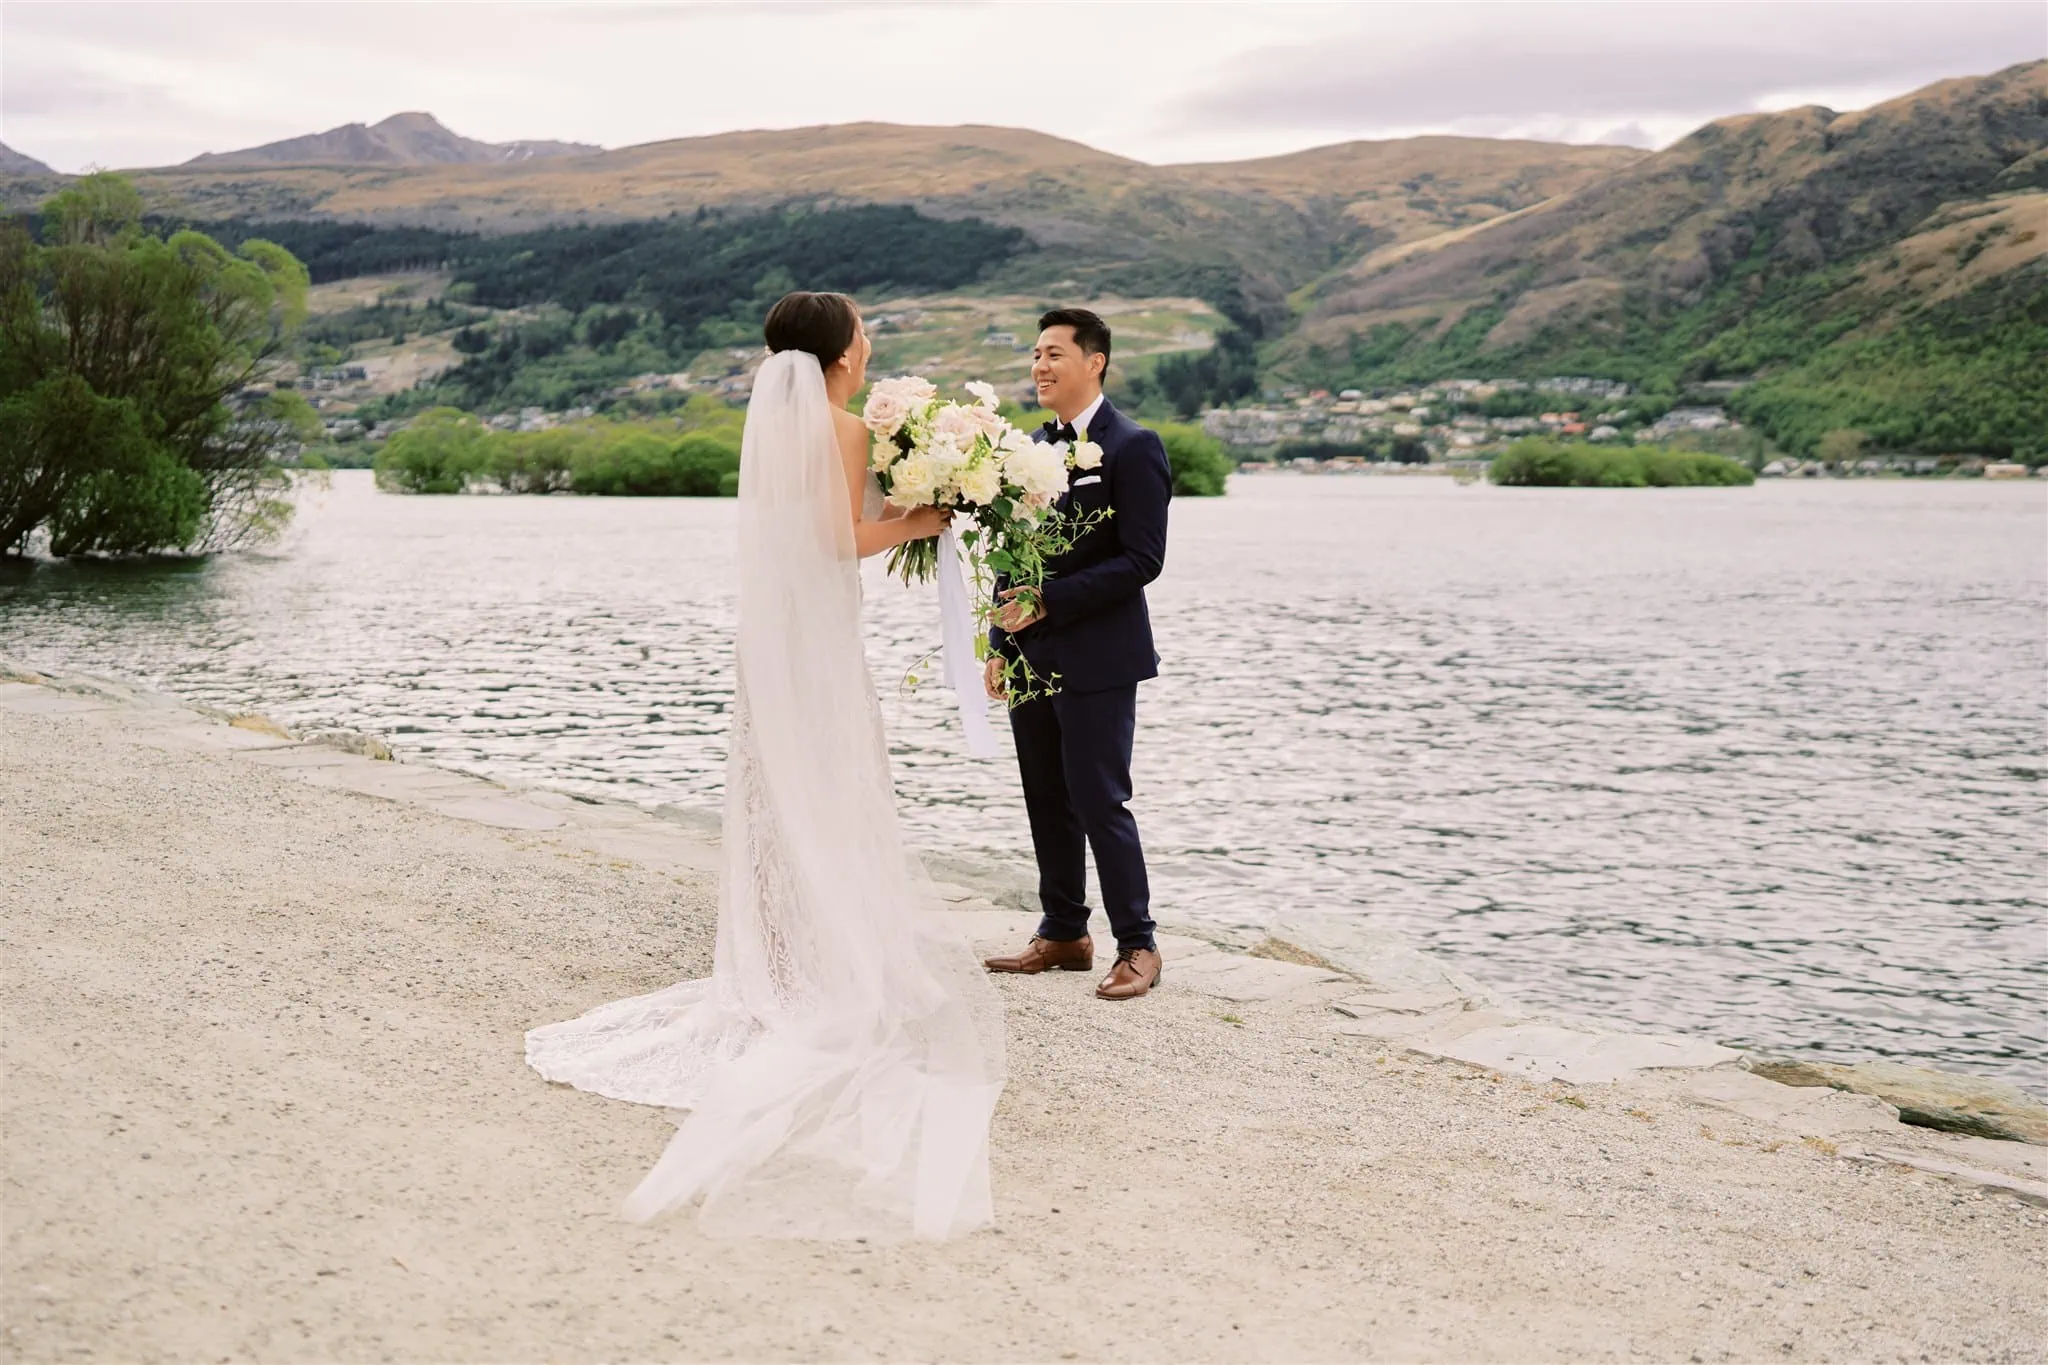 Queenstown Elopement Heli Wedding Photographer クイーンズタウン結婚式 | Cliff and Mariah's Queenstown Elopement, an epic journey of love on a beach with flowers.